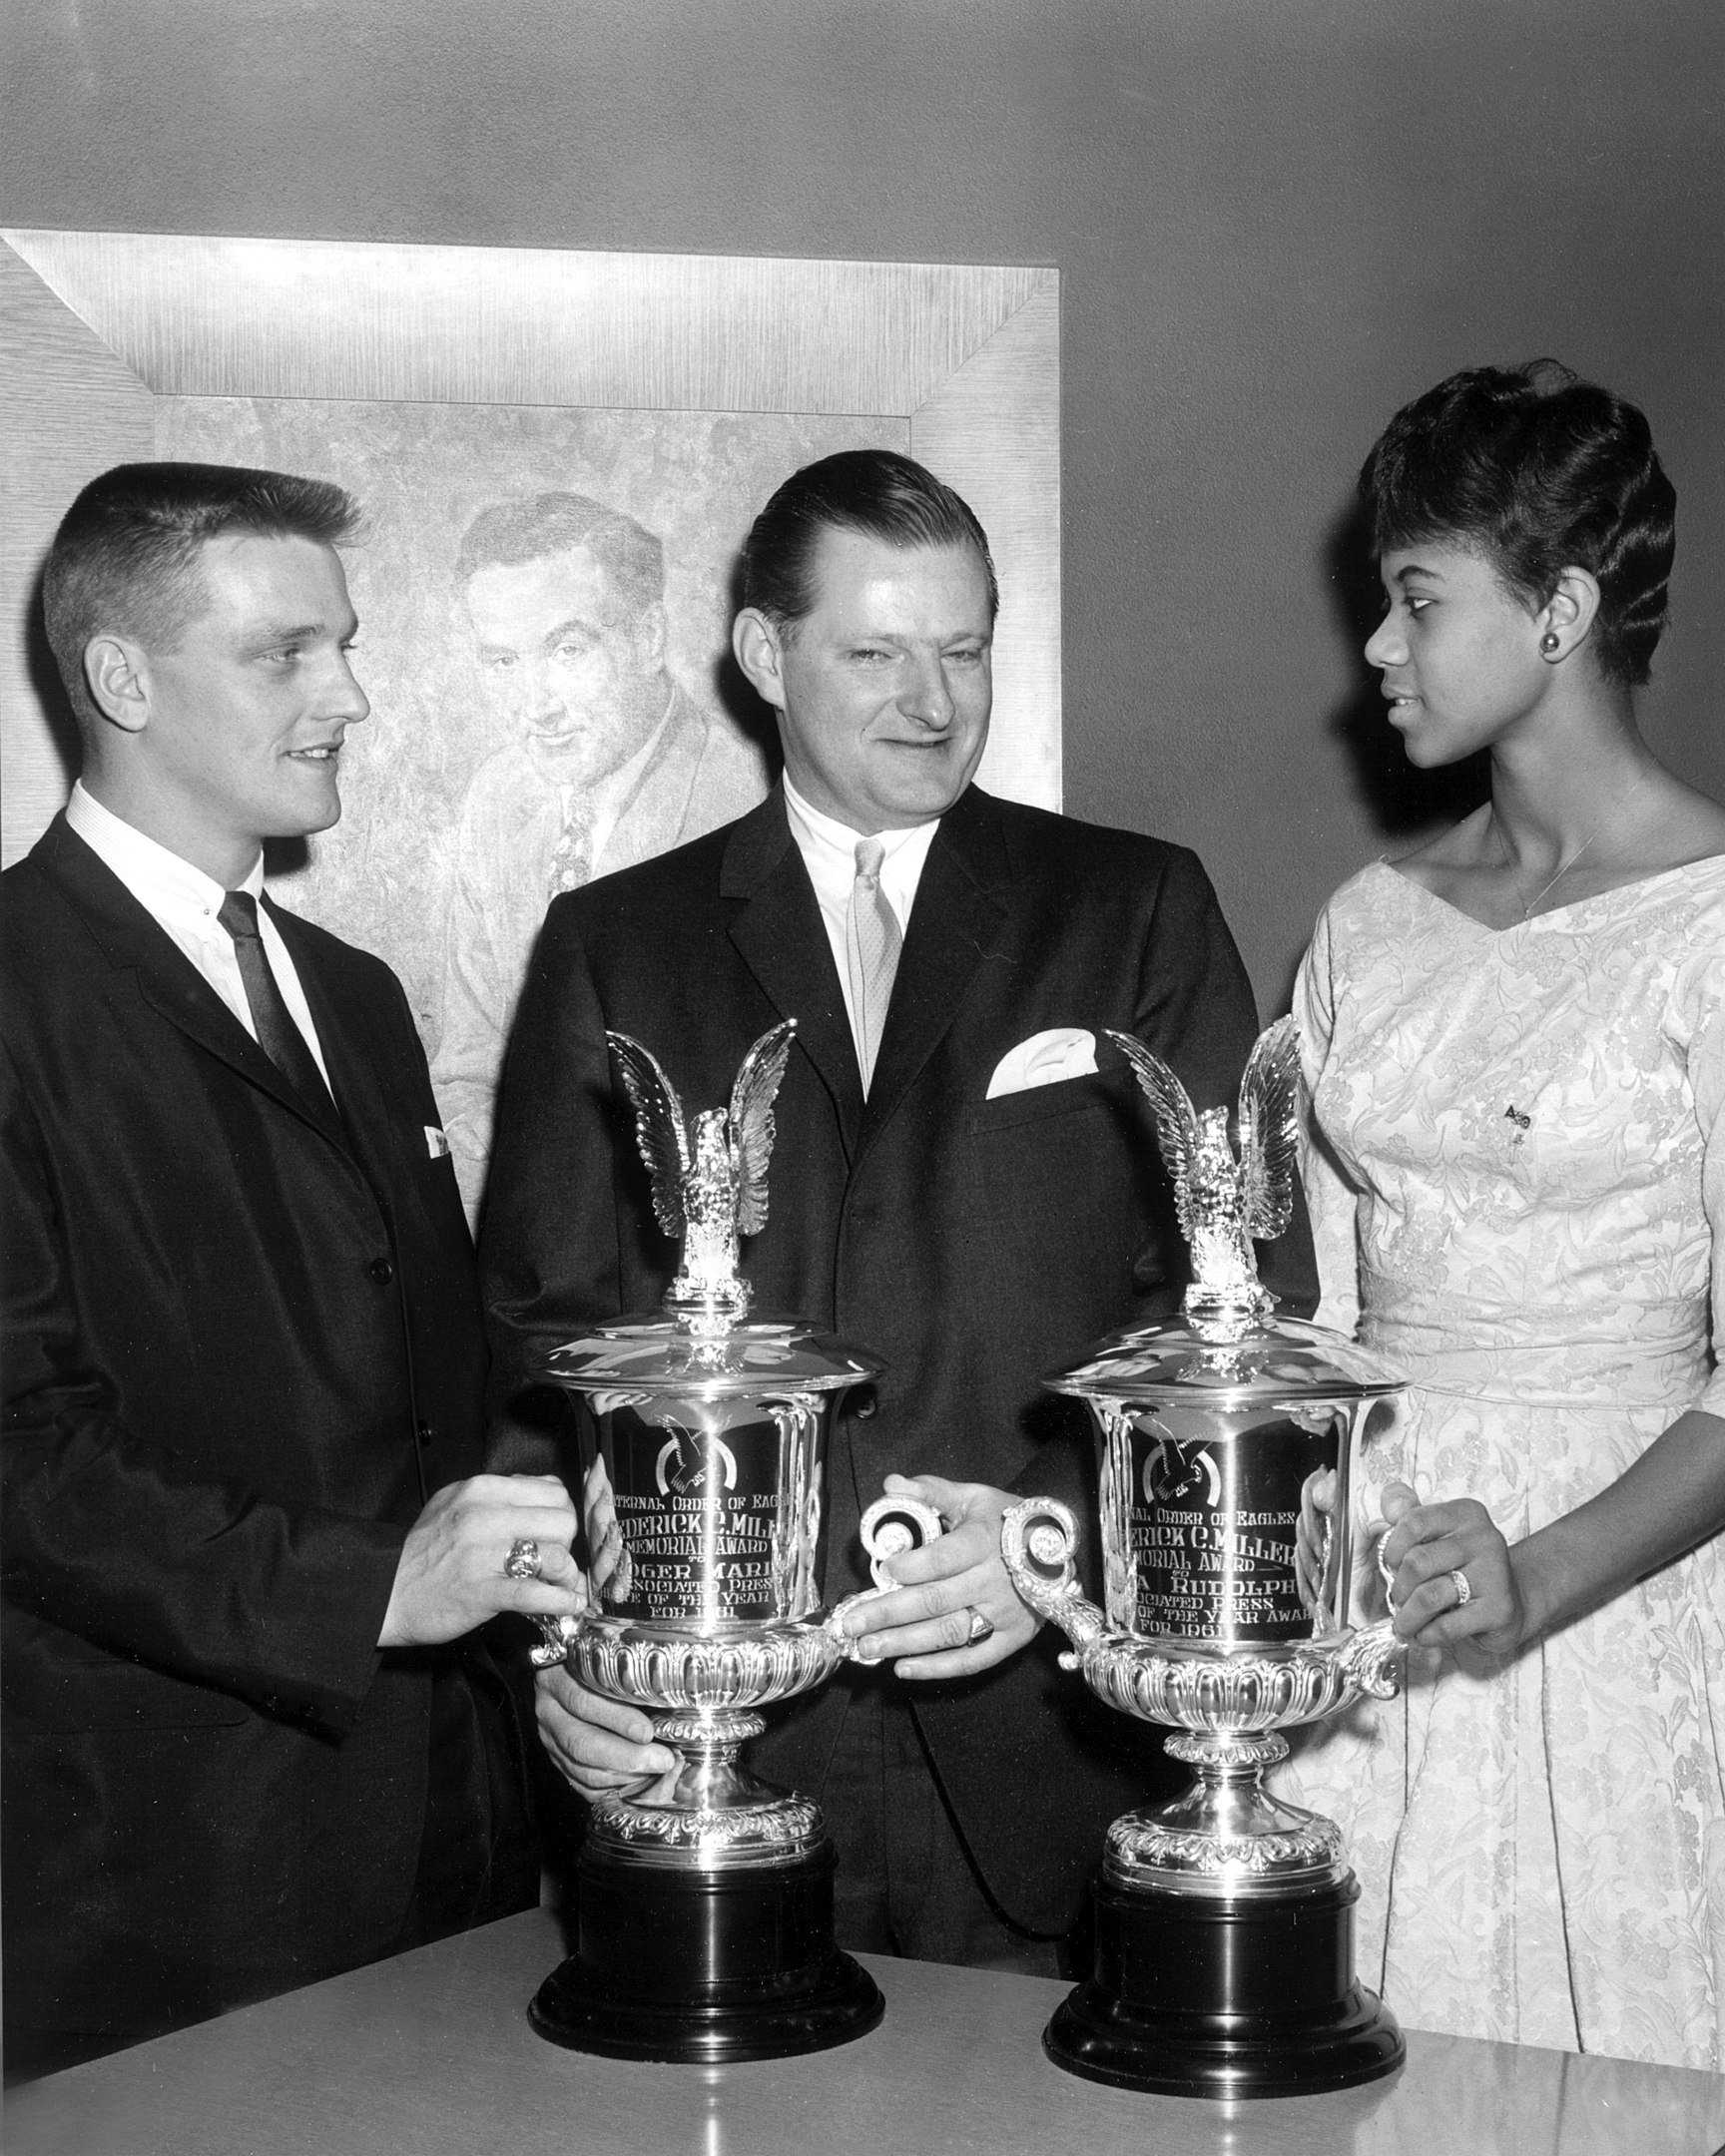 Wilma Rudolph receives the Fraternal Order of Eagles Award 1961 alongside Roger Maris | Photo: Wikimedia Commons Images, CC BY-SA 3.0